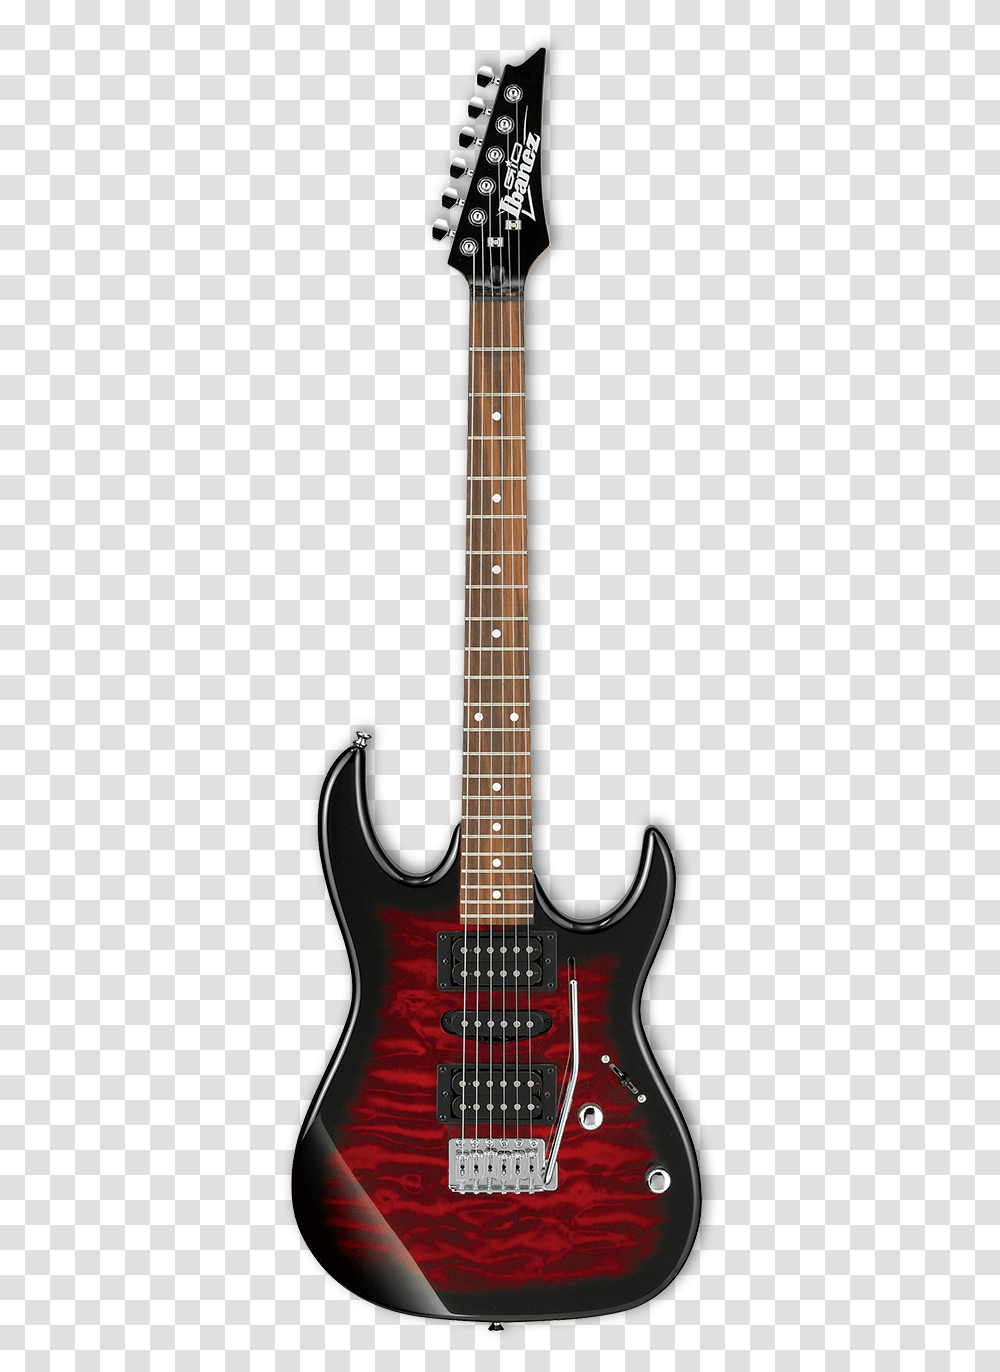 Ibanez Gio Series, Guitar, Leisure Activities, Musical Instrument, Electric Guitar Transparent Png